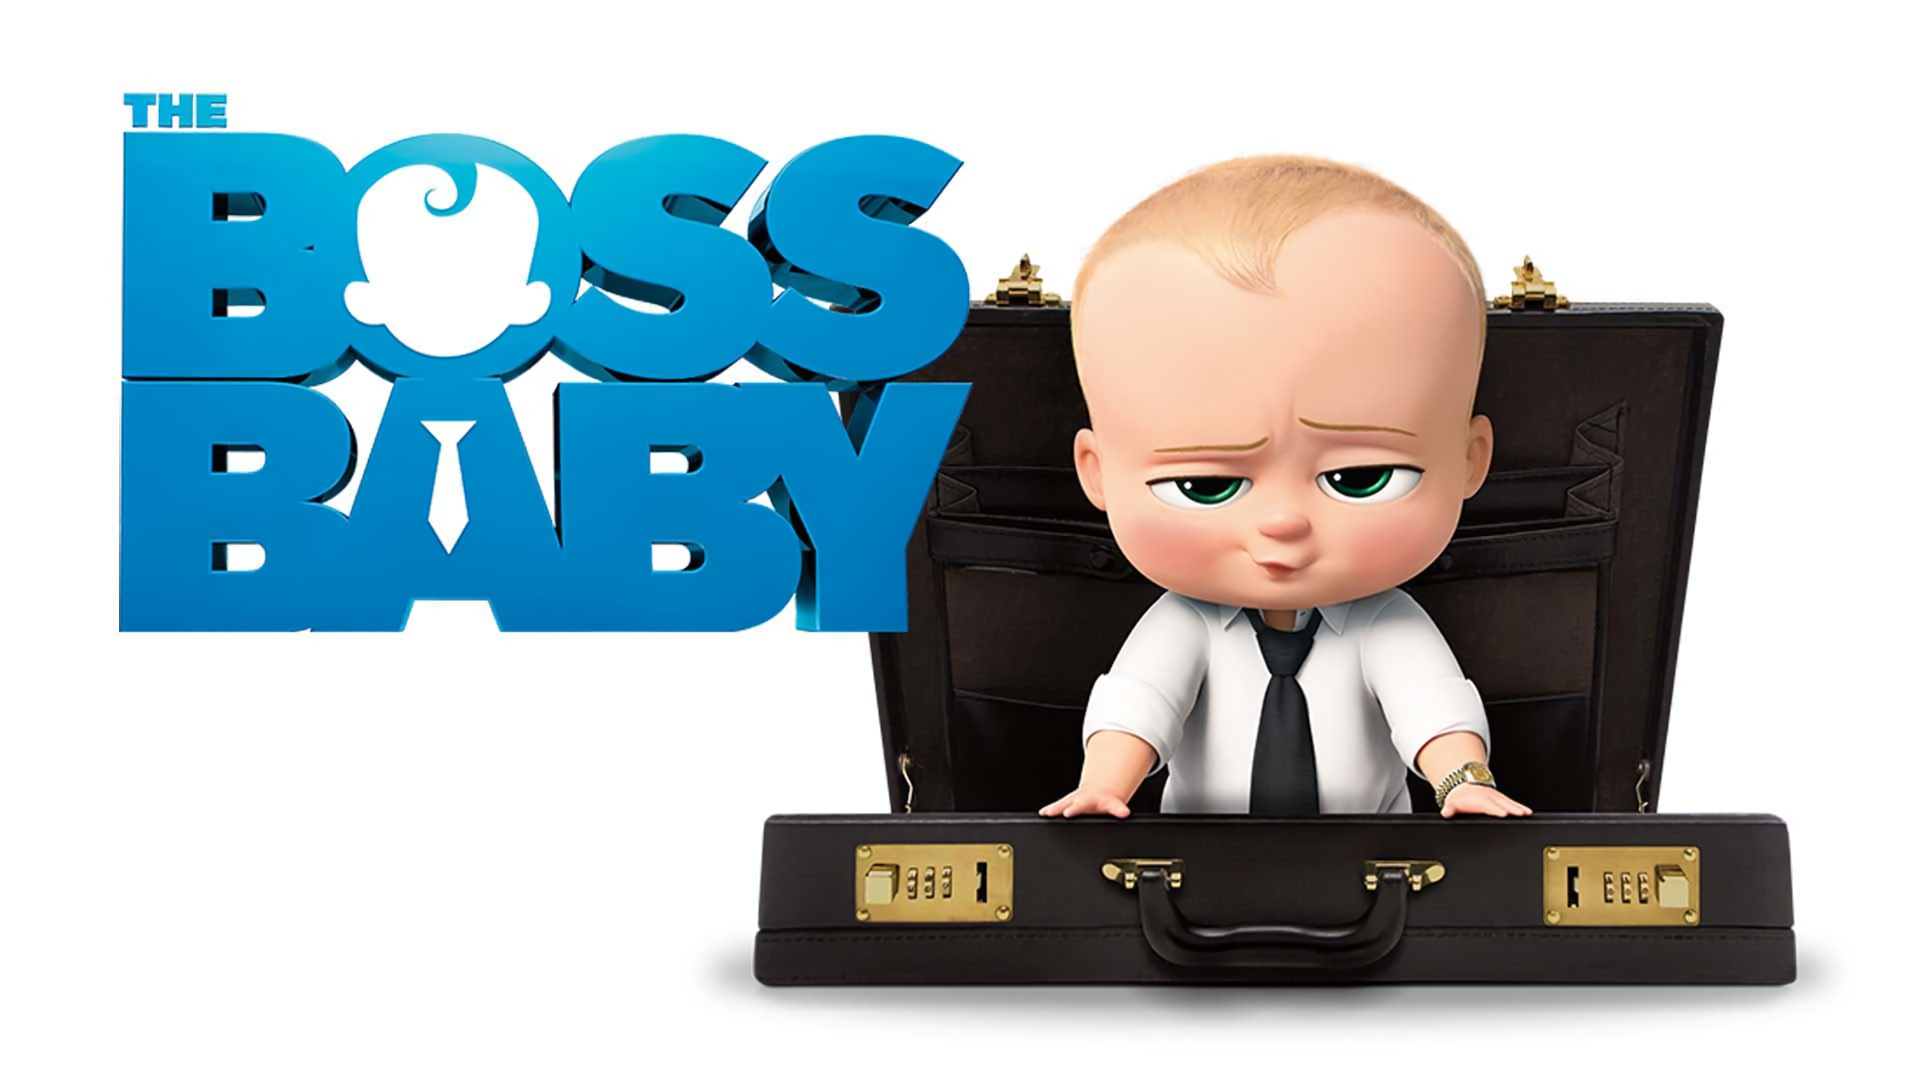 movies 2016 watch the baby boss online free